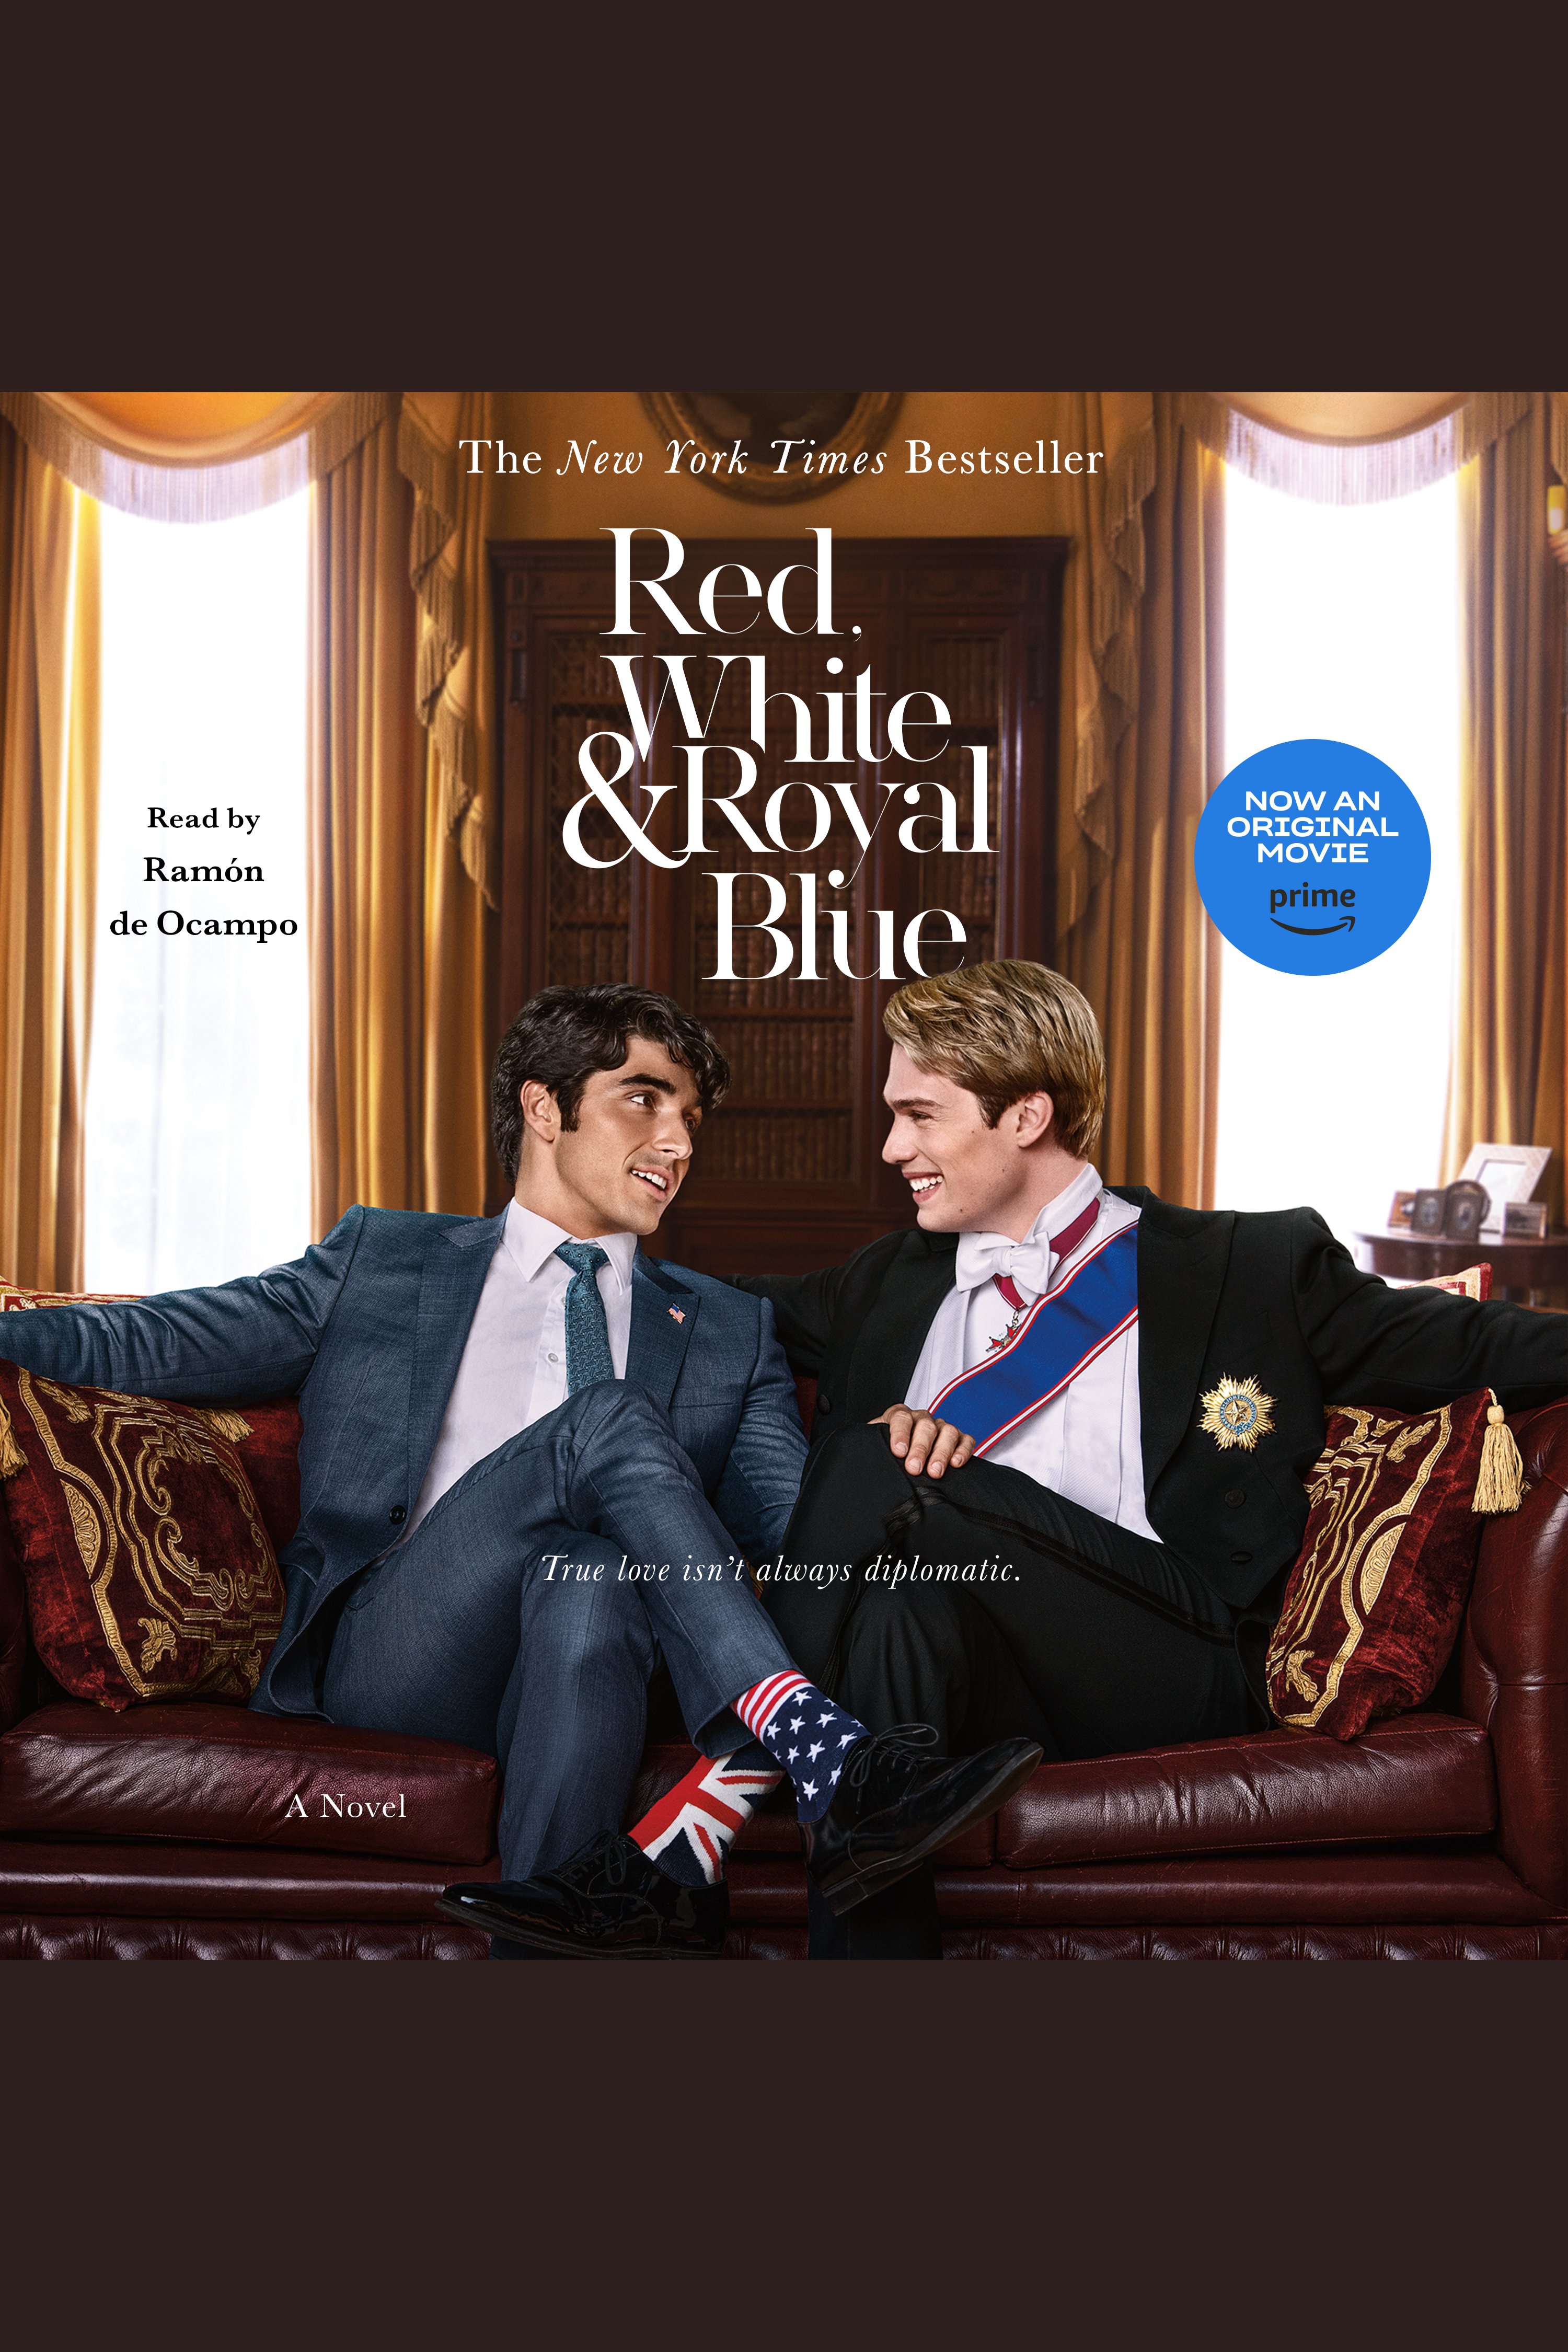 Red, white & royal blue cover image